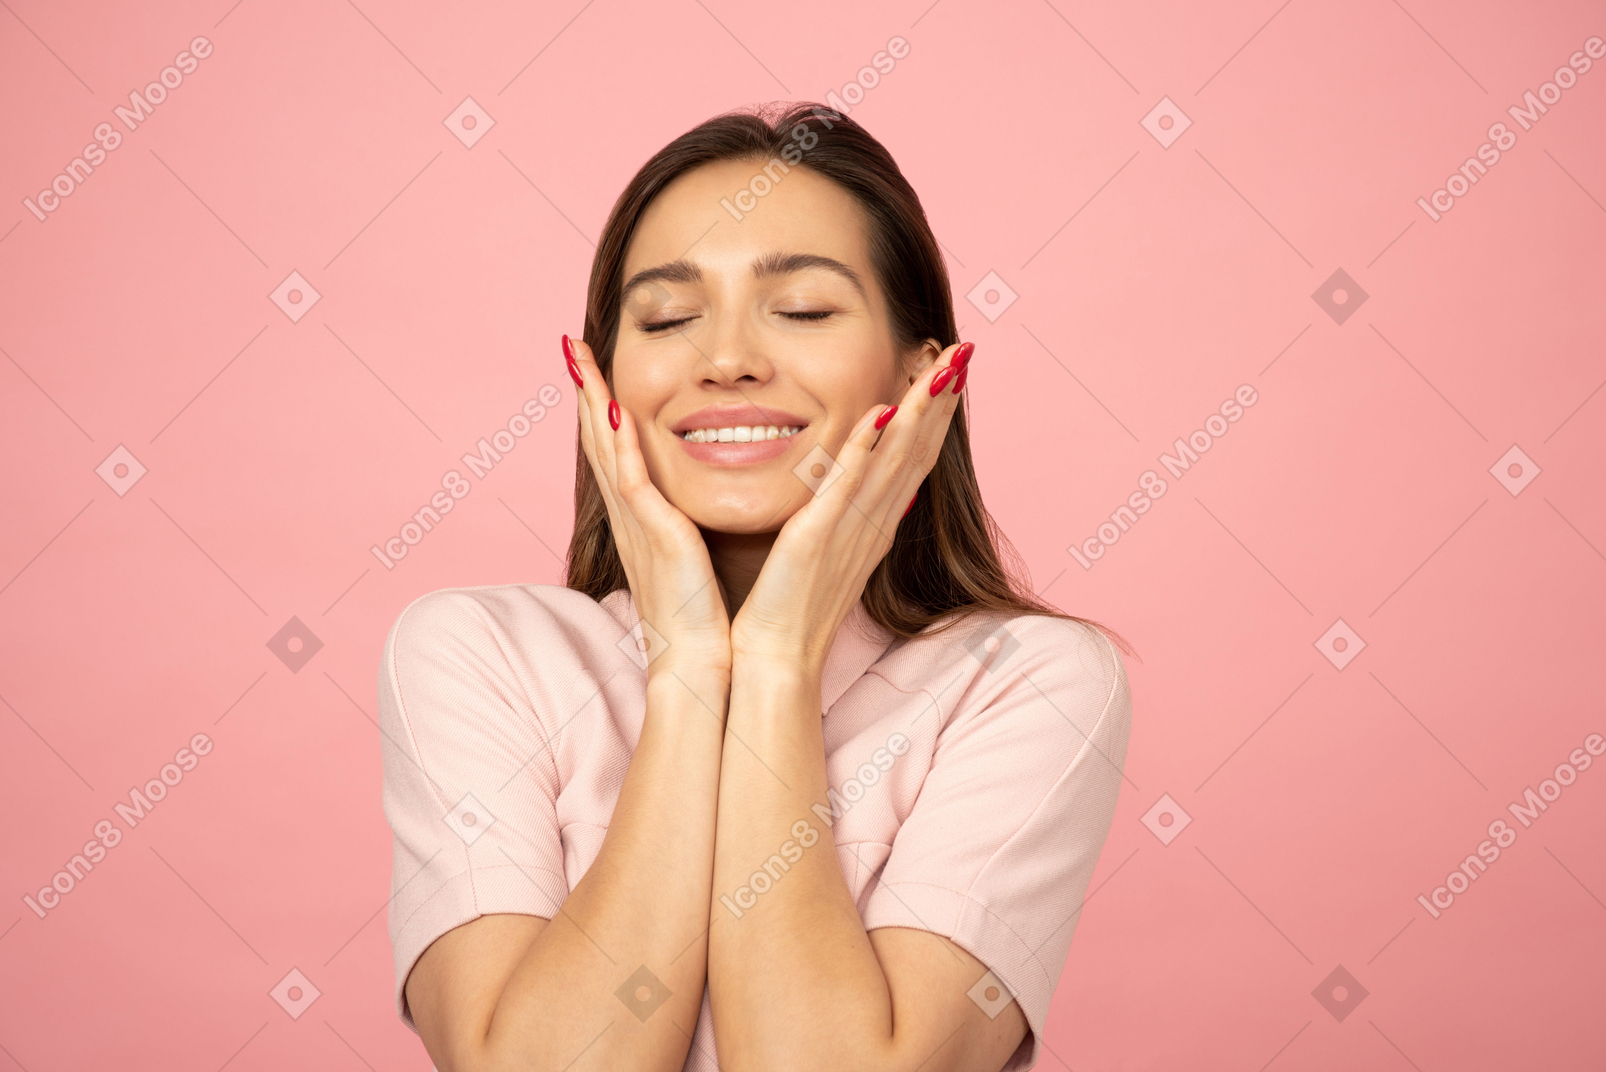 Attractive young girl smiling and touching her face with both hands